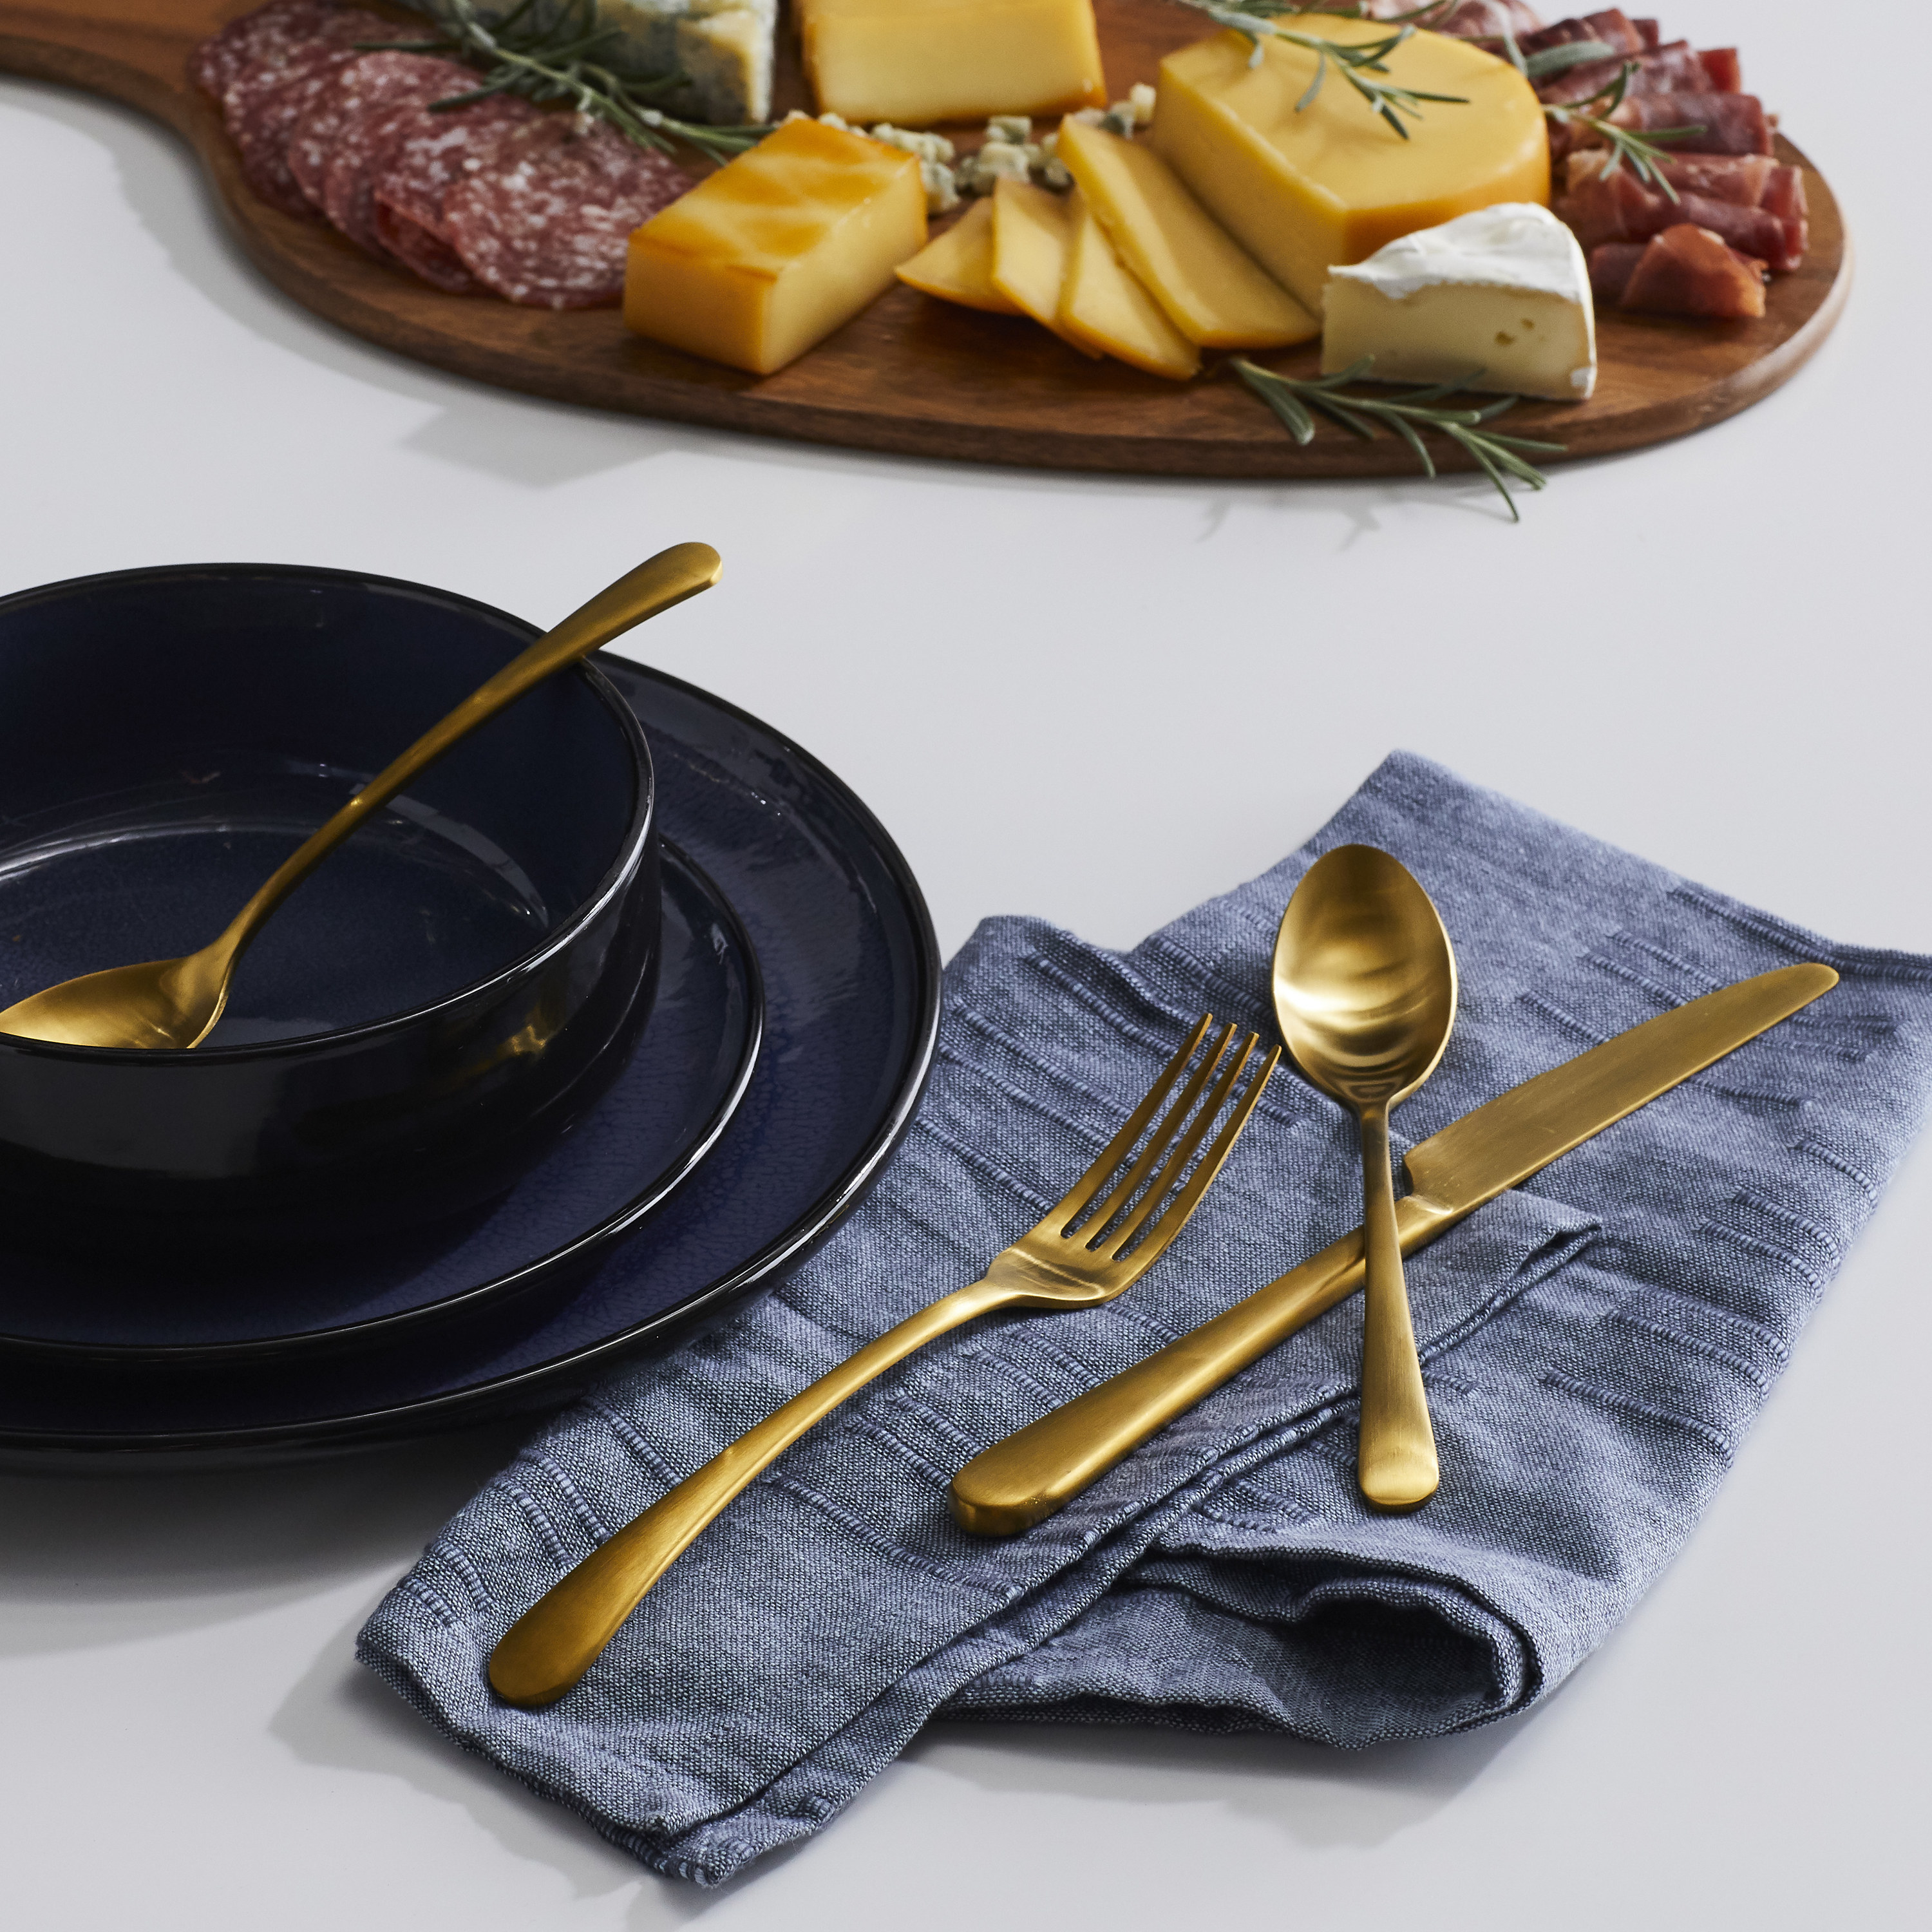 The gold flatware with blue napkins and tableware